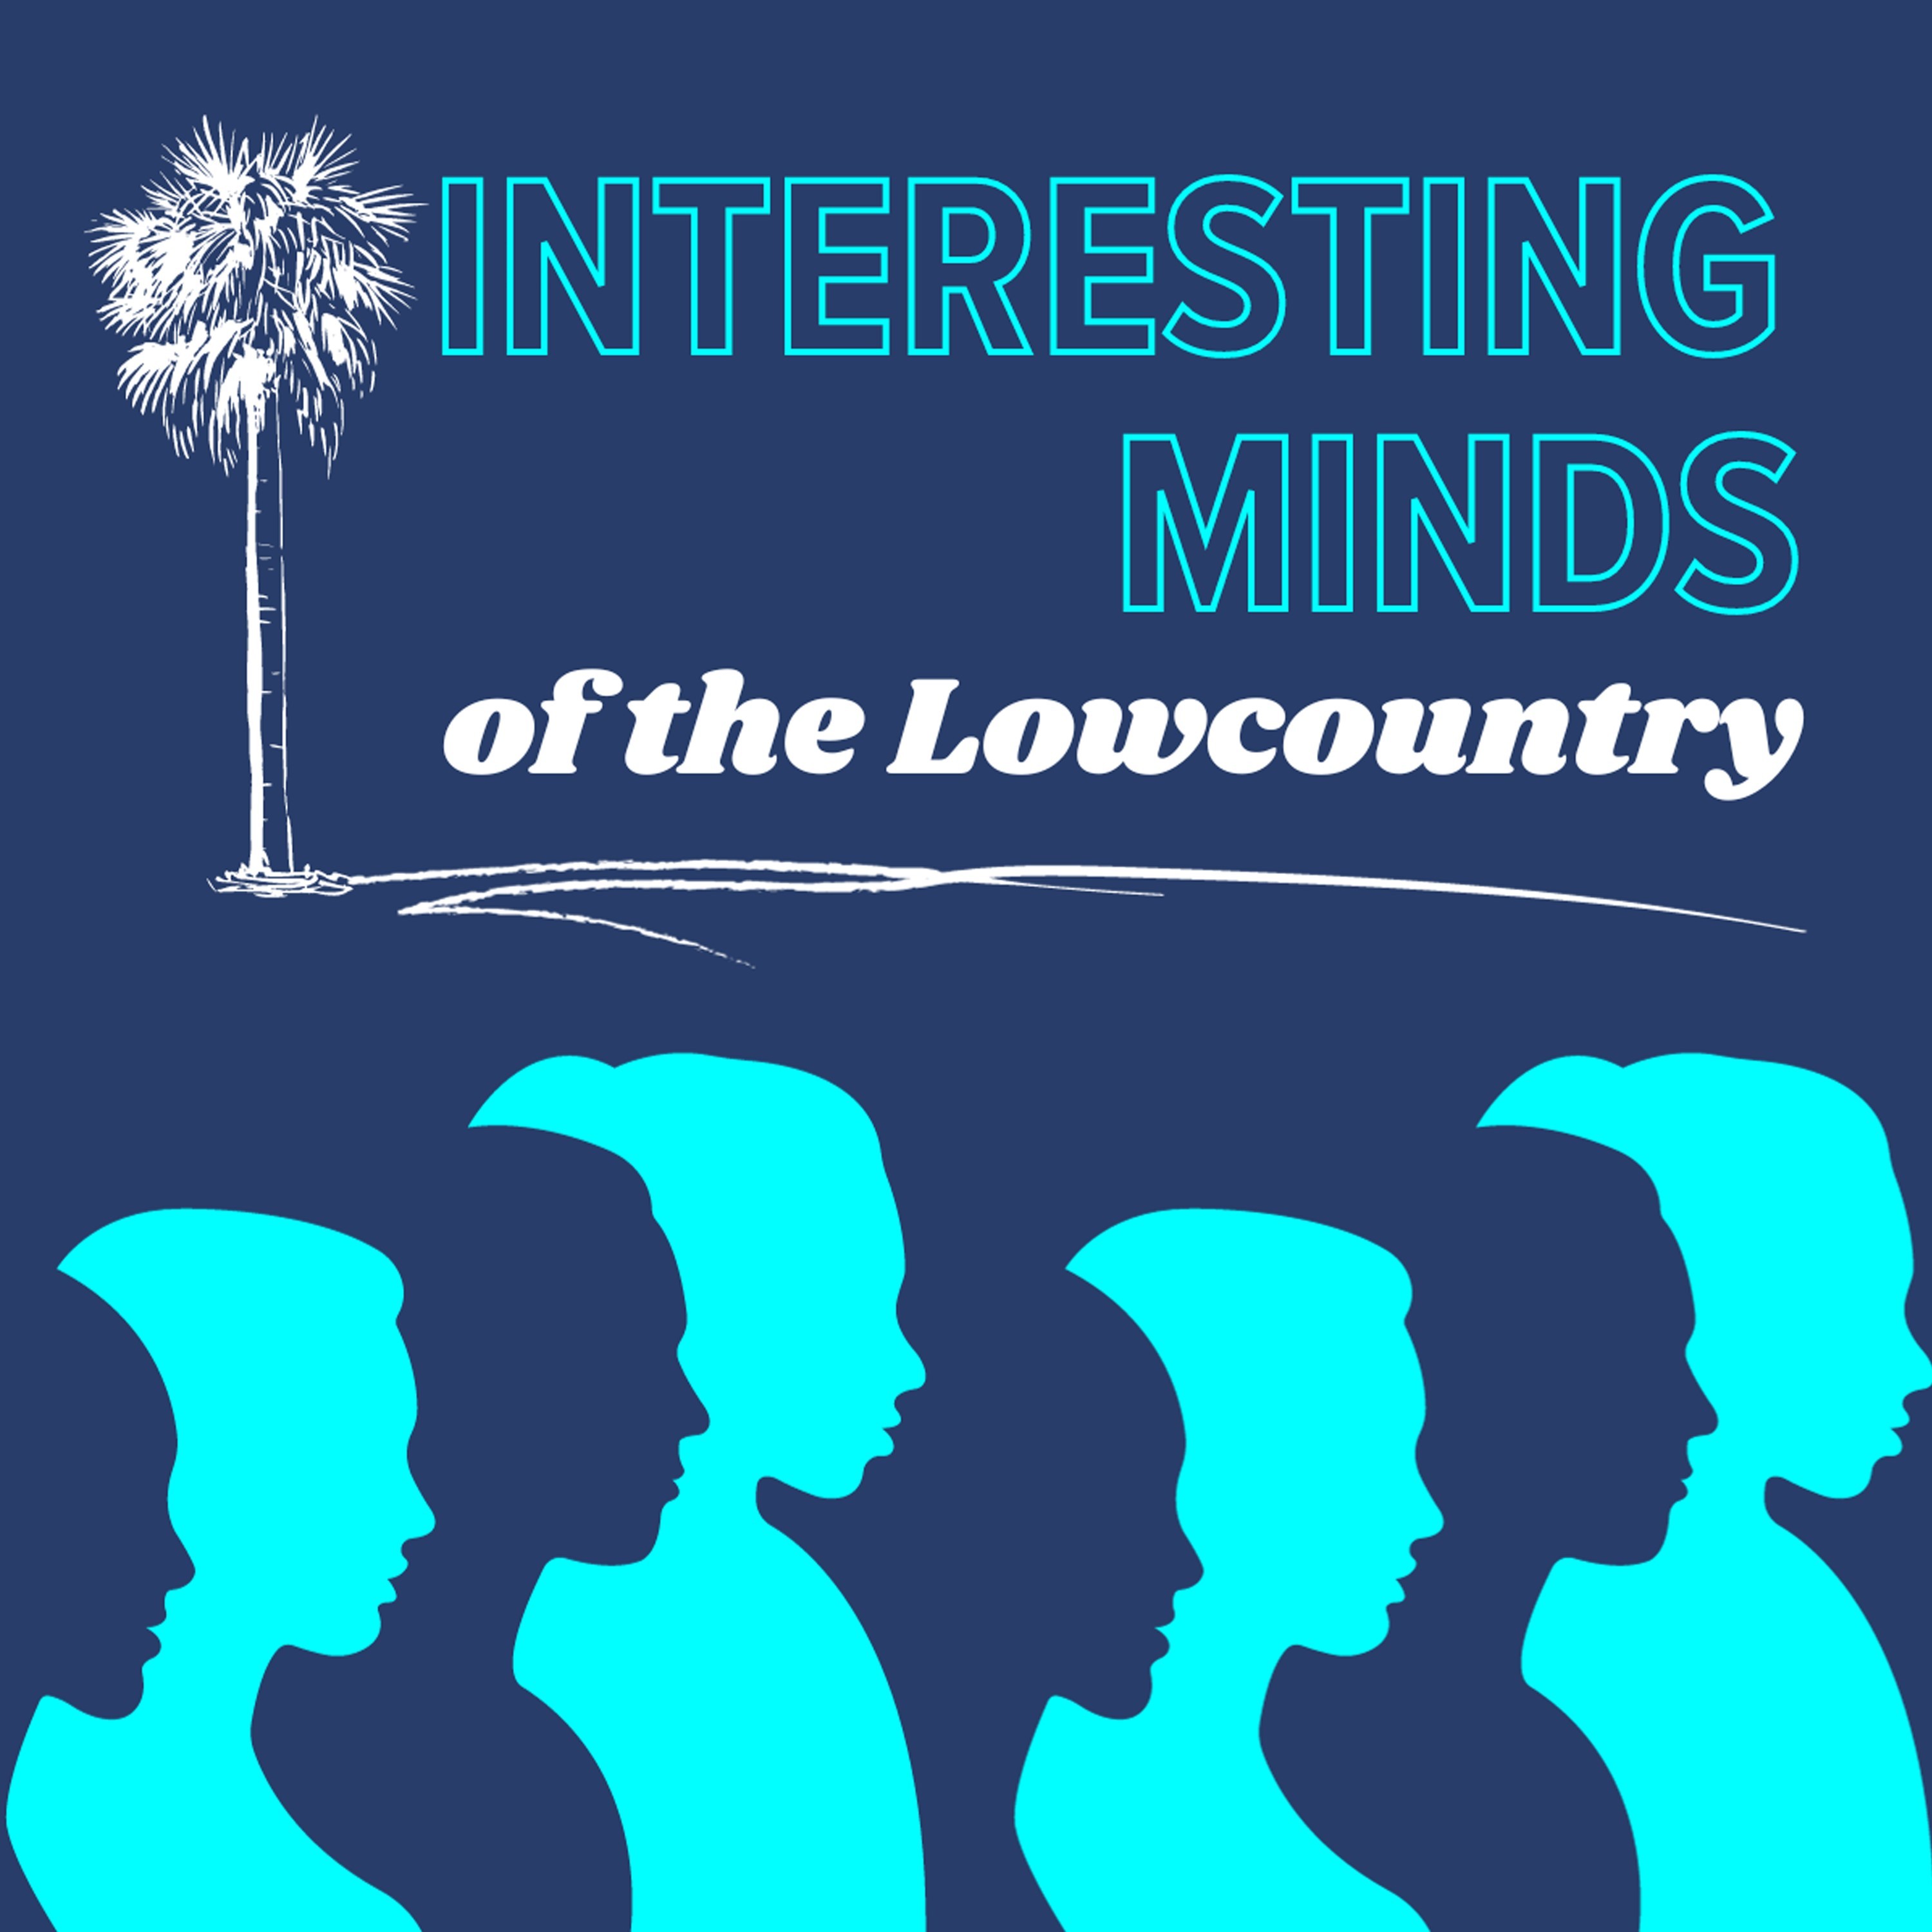 Interesting Minds of the Lowcountry